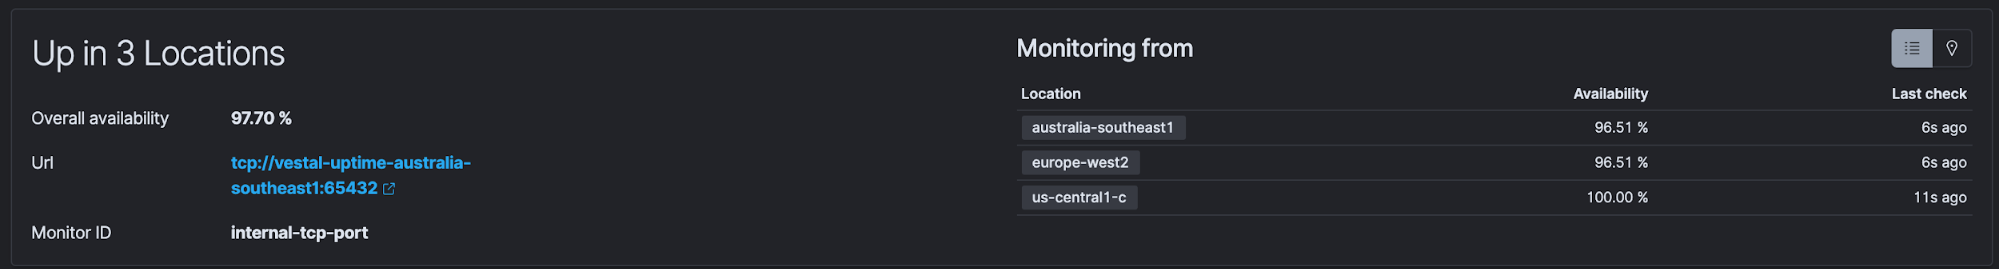 Availability percentages on a monitor detail page